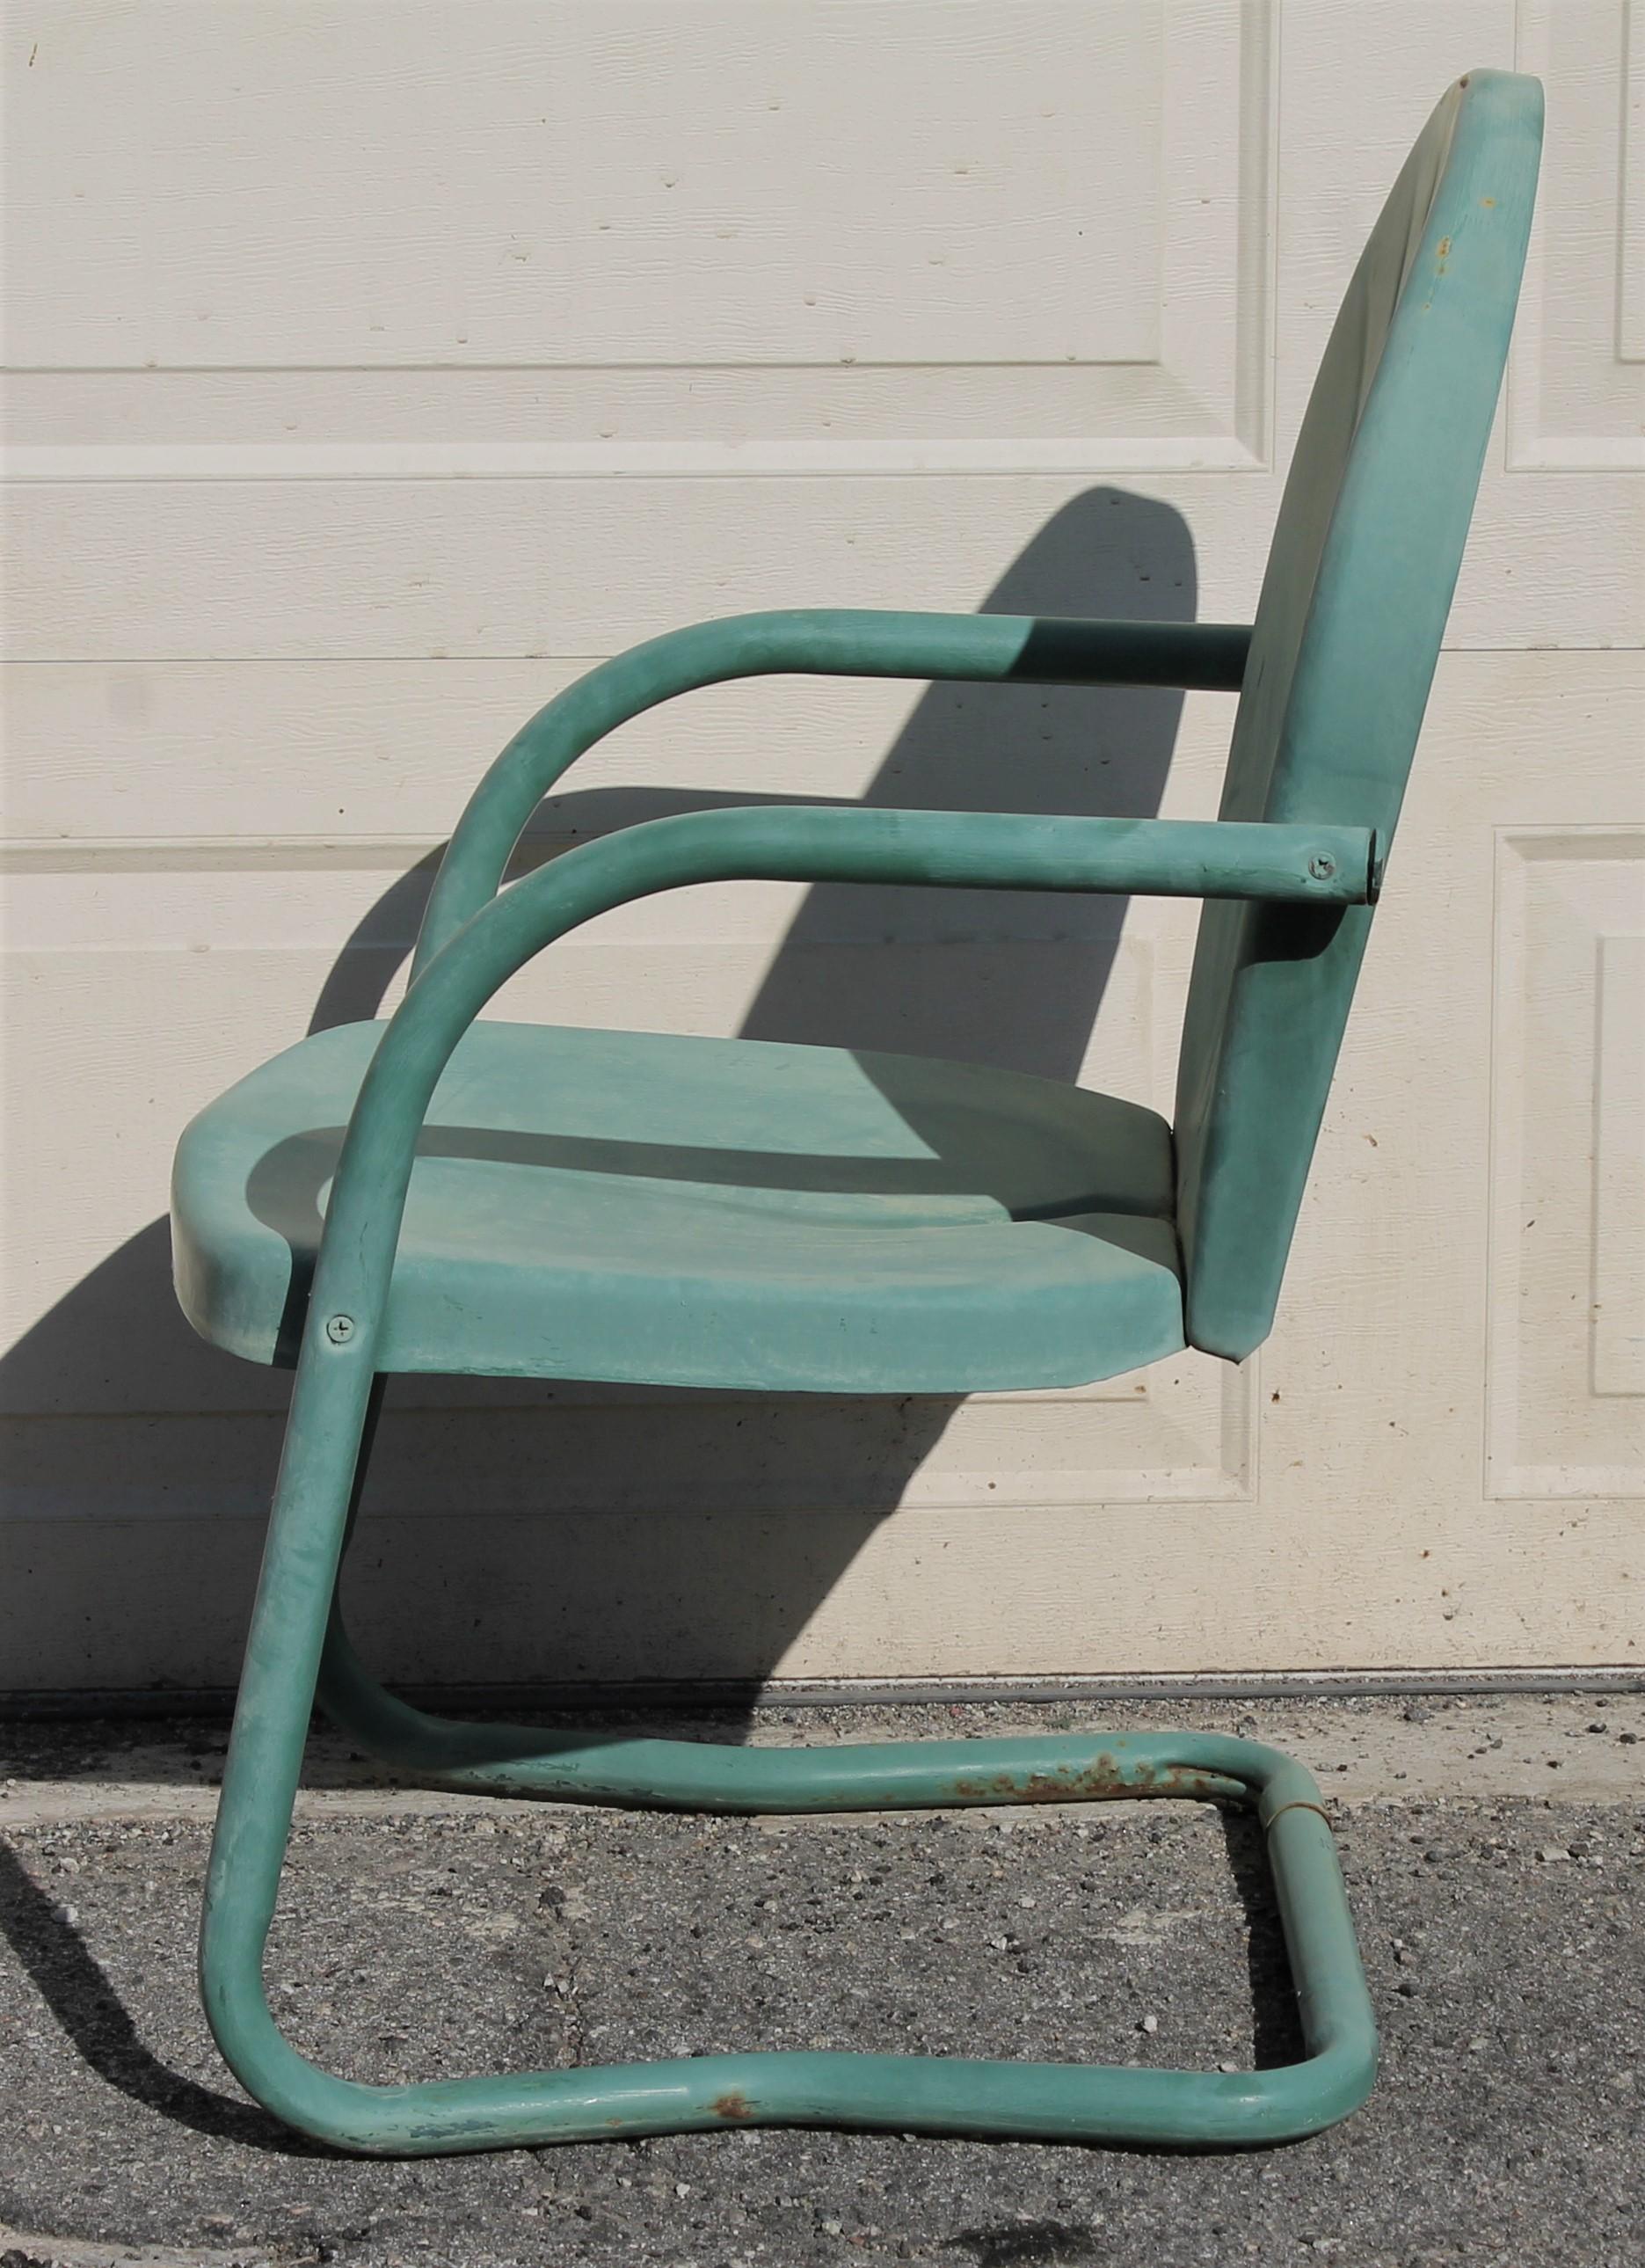 Hand-Painted Outdoor Lawn/ Beach Metal Chairs in Sea Foam Green, 4